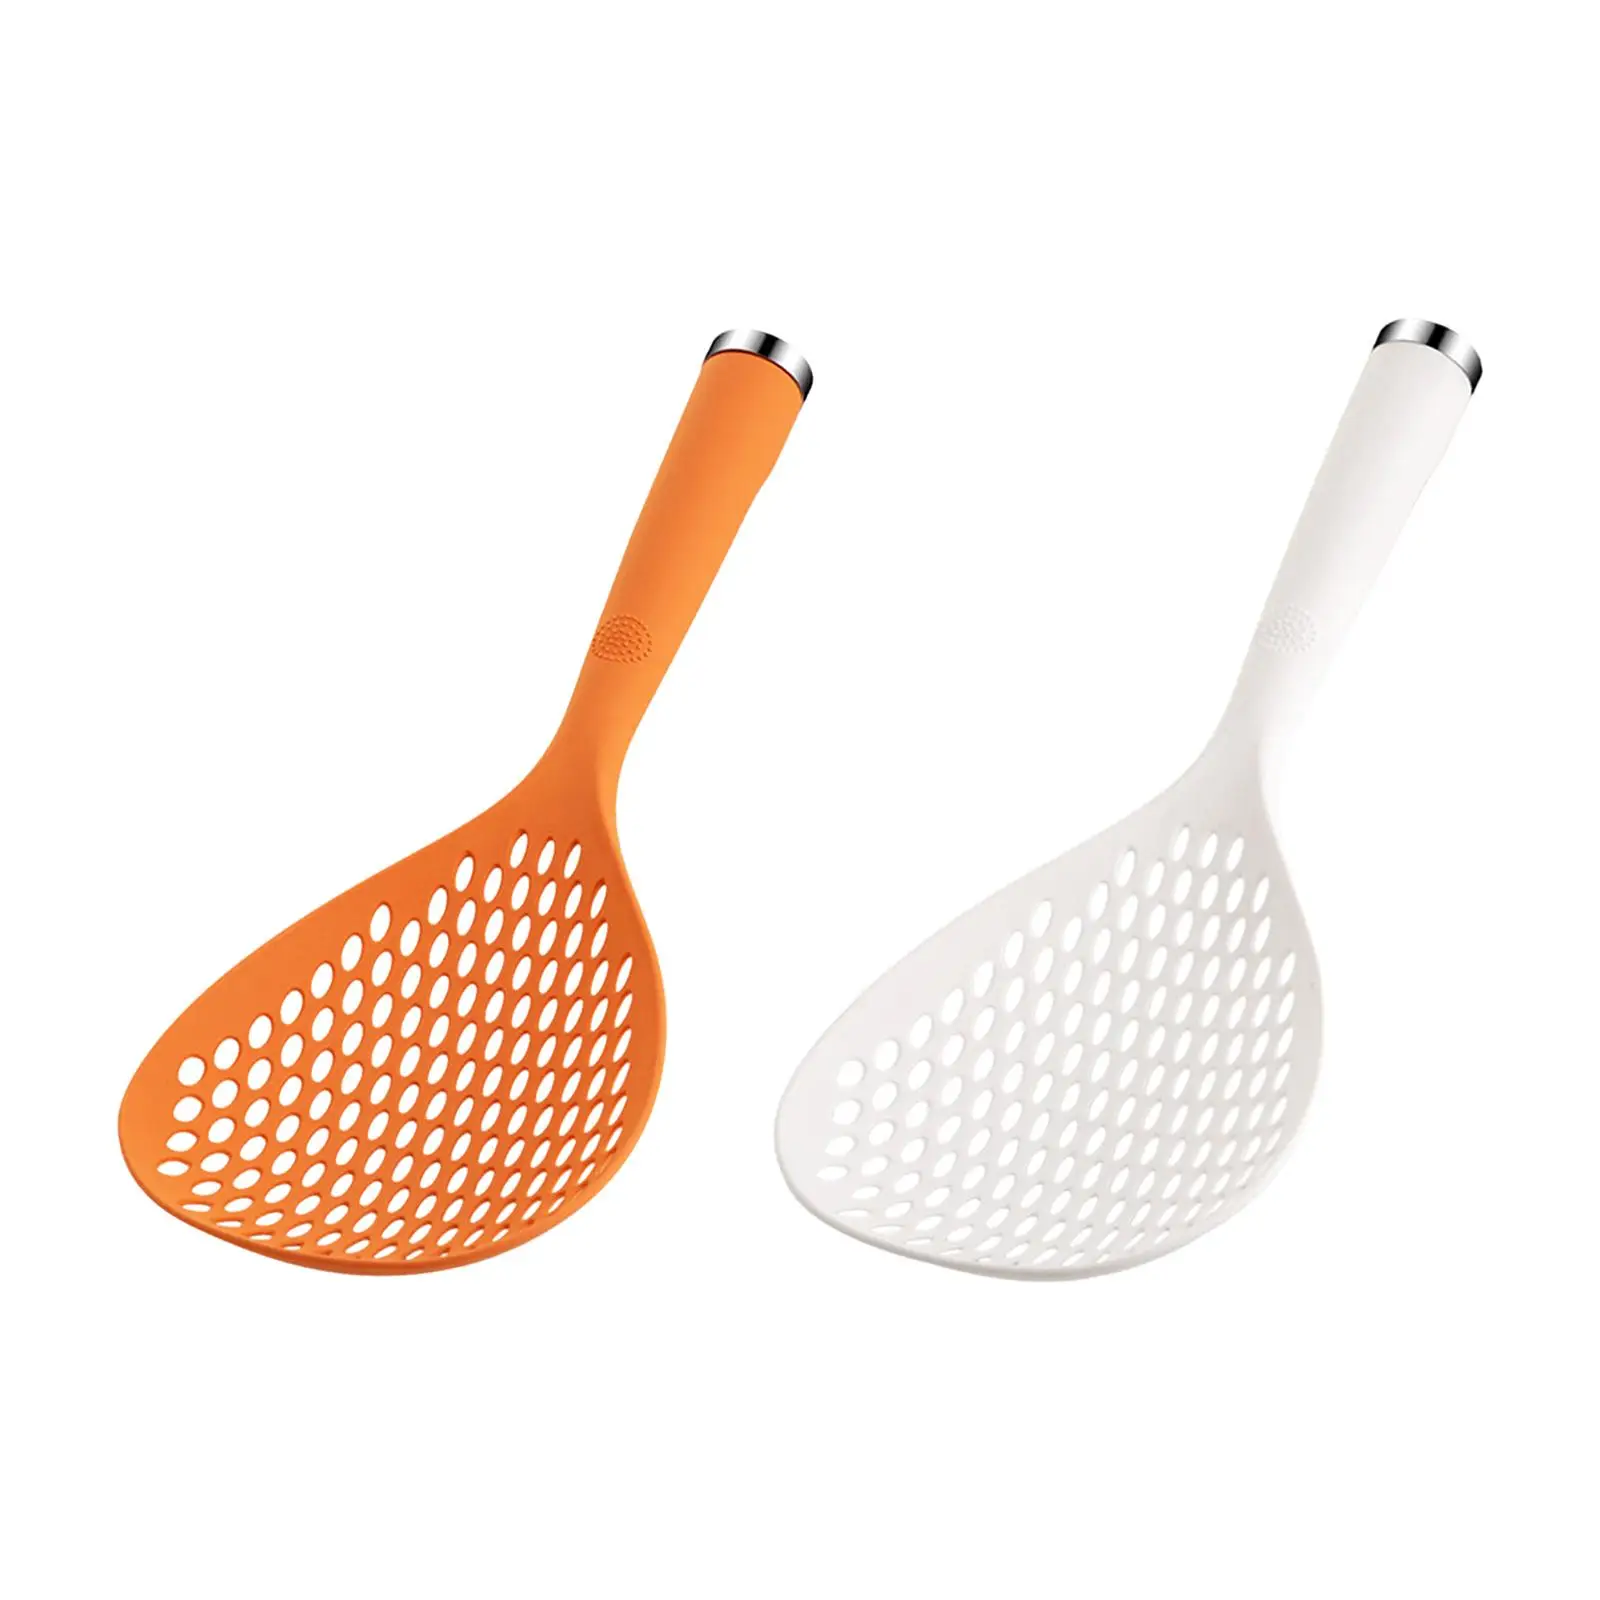 Fine Mesh Sieve Sifter, Kitchen Skimmer with Handle, Food Strainer, Pasta Spoon with Long Handle for Dumplings Kitchen Fruits